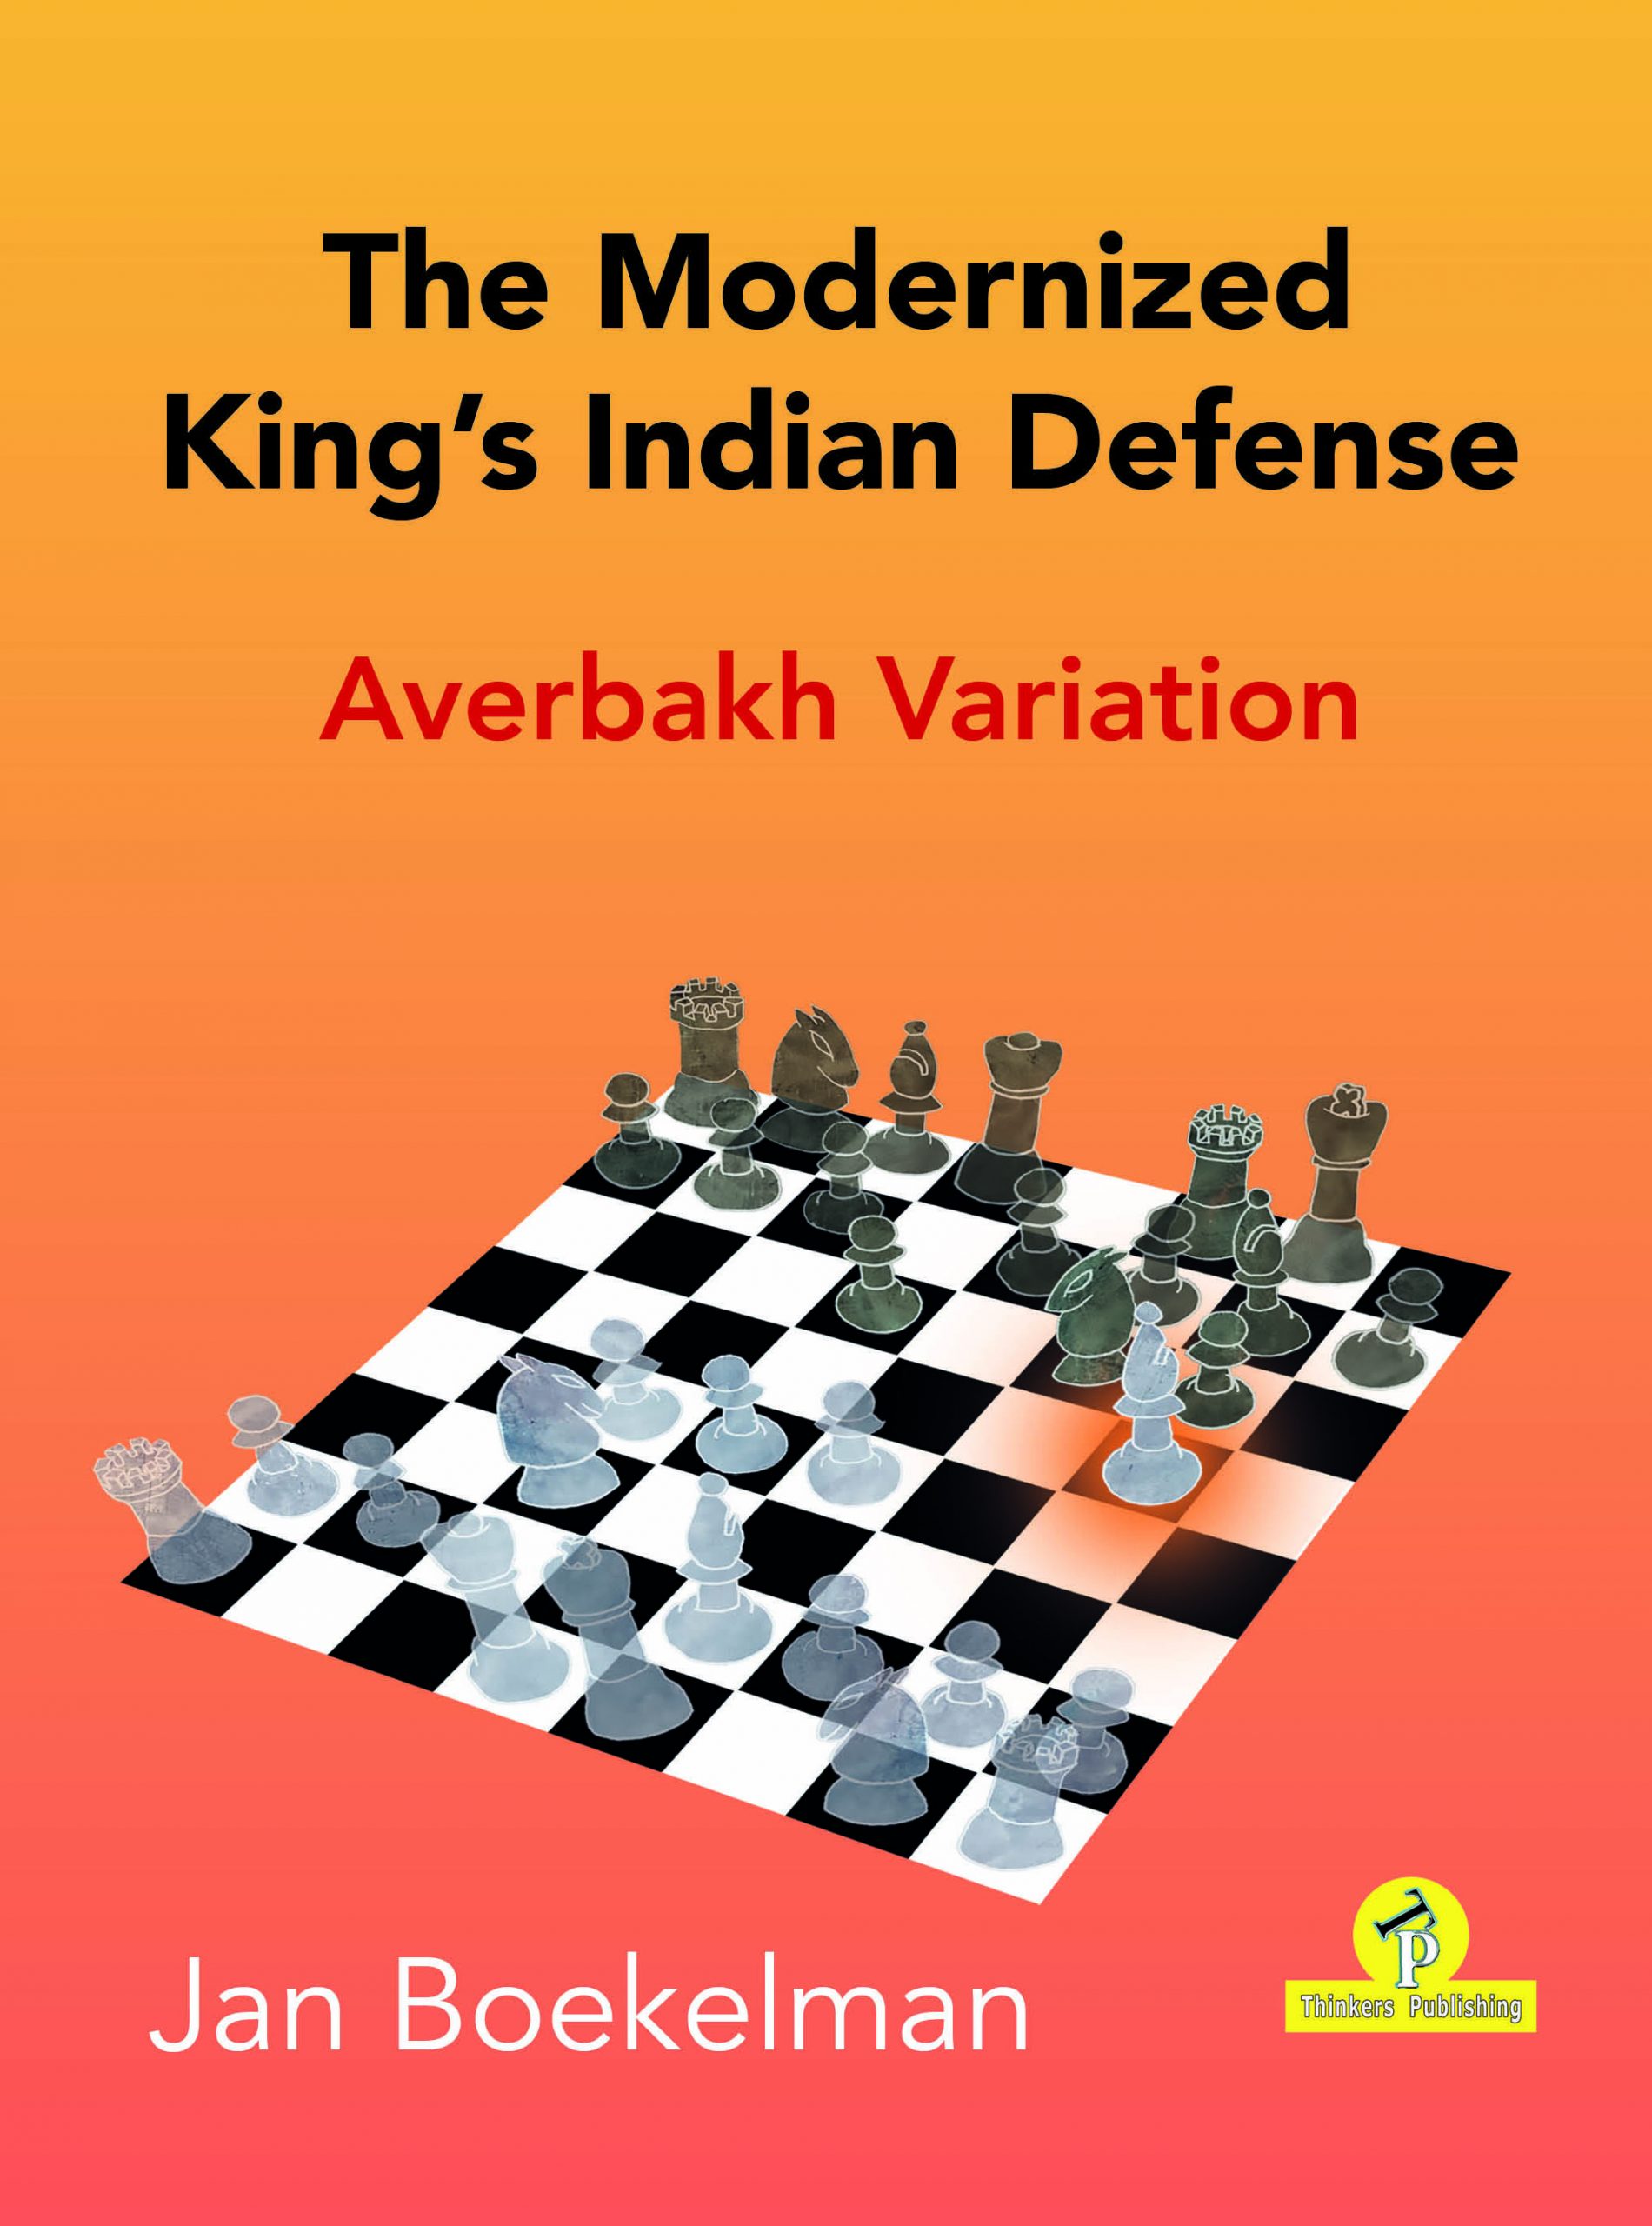 Kings-Indian: A Complete Chess Opening Repertoire vs 1.d4